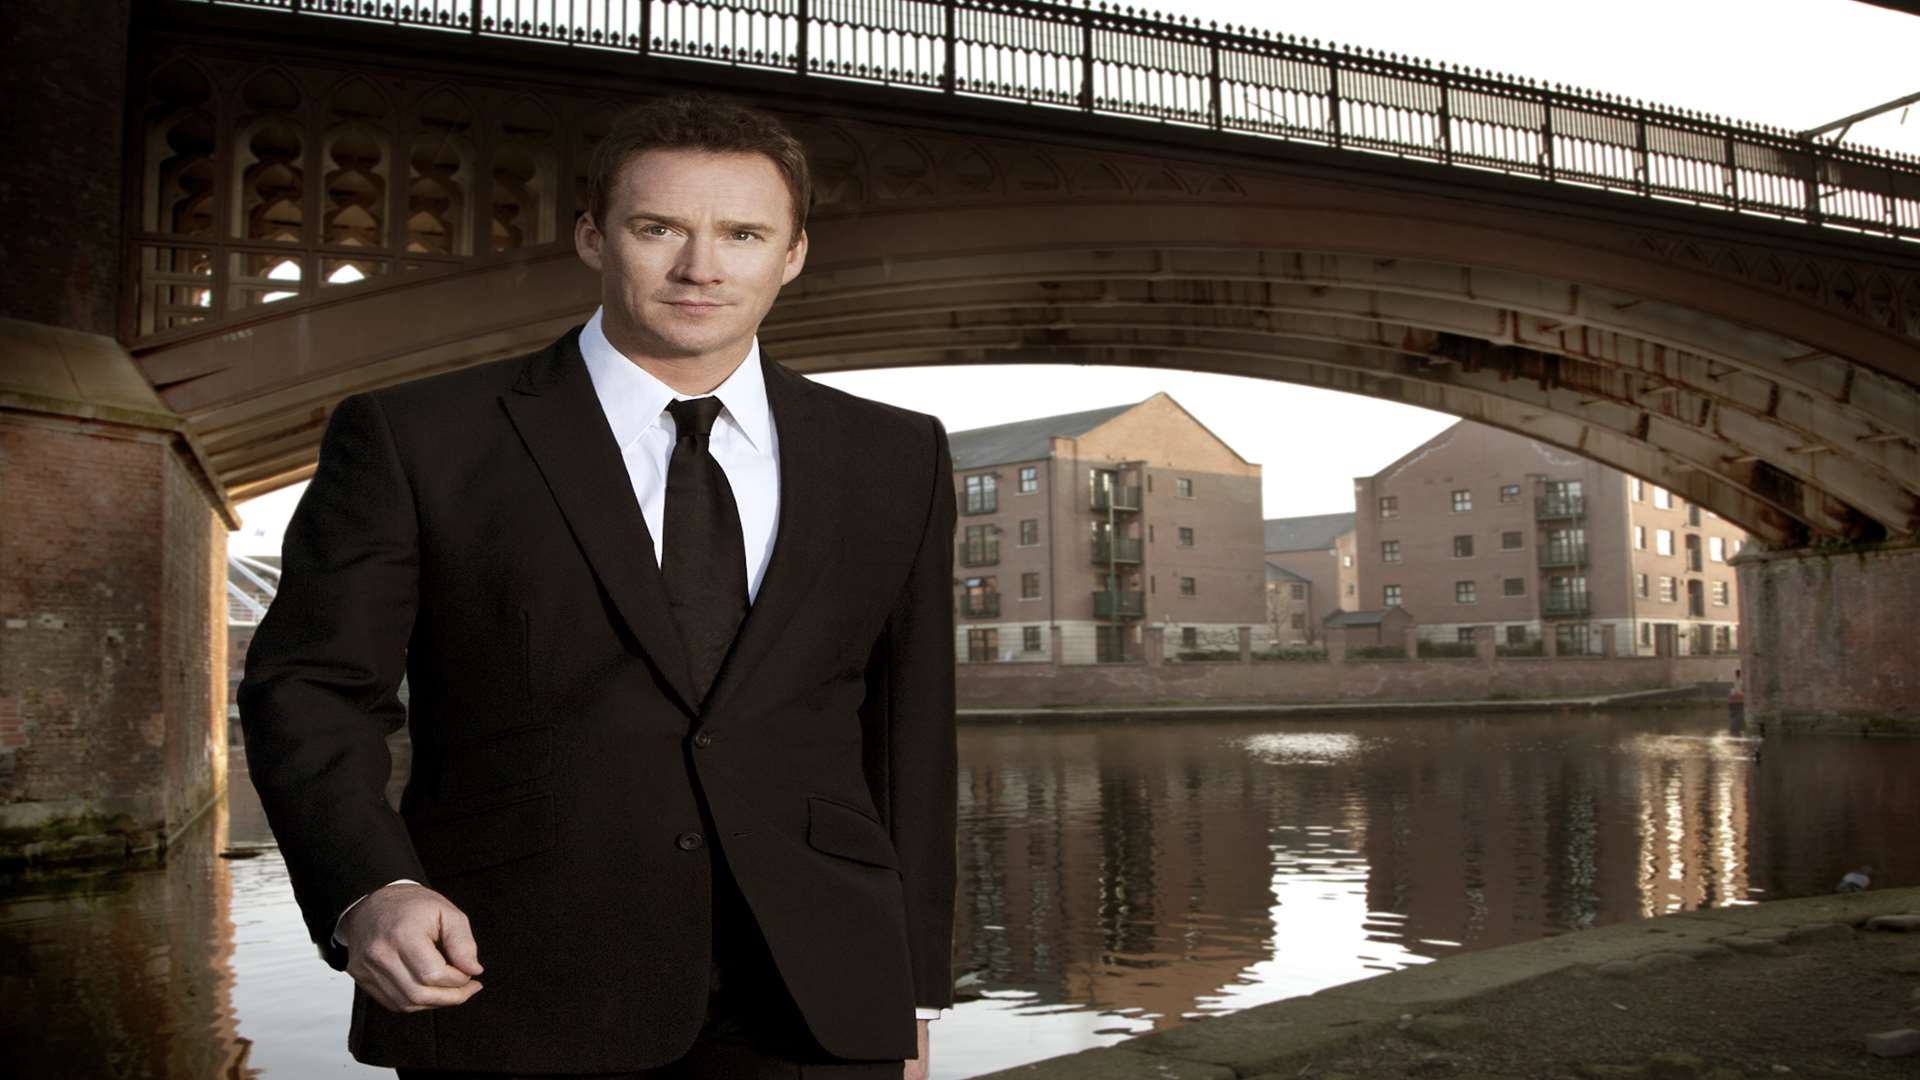 Russell Watson started out in working men's clubs in the 1990s